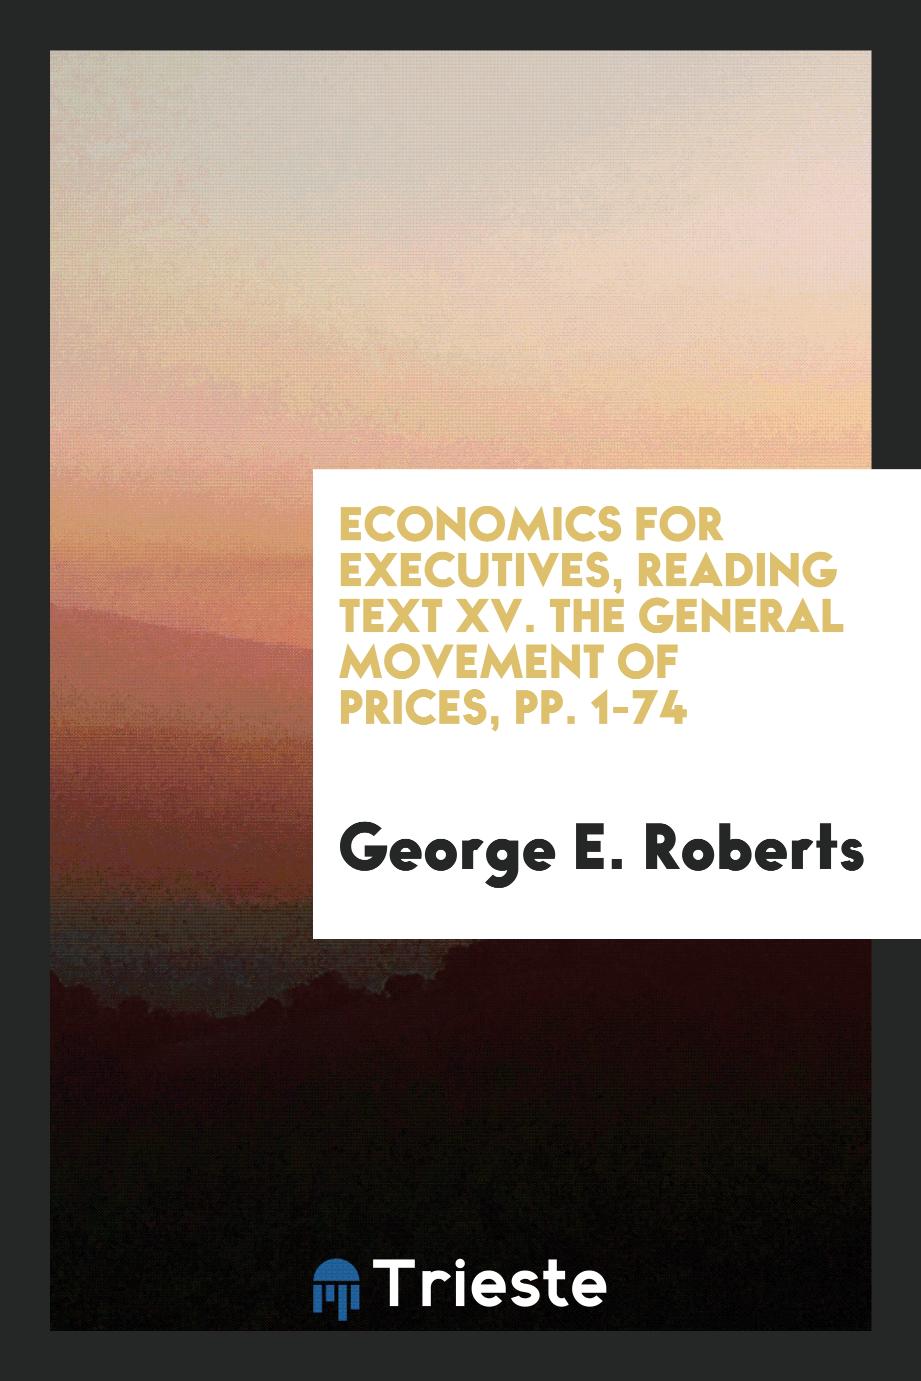 Economics for Executives, reading text XV. The general movement of Prices, pp. 1-74